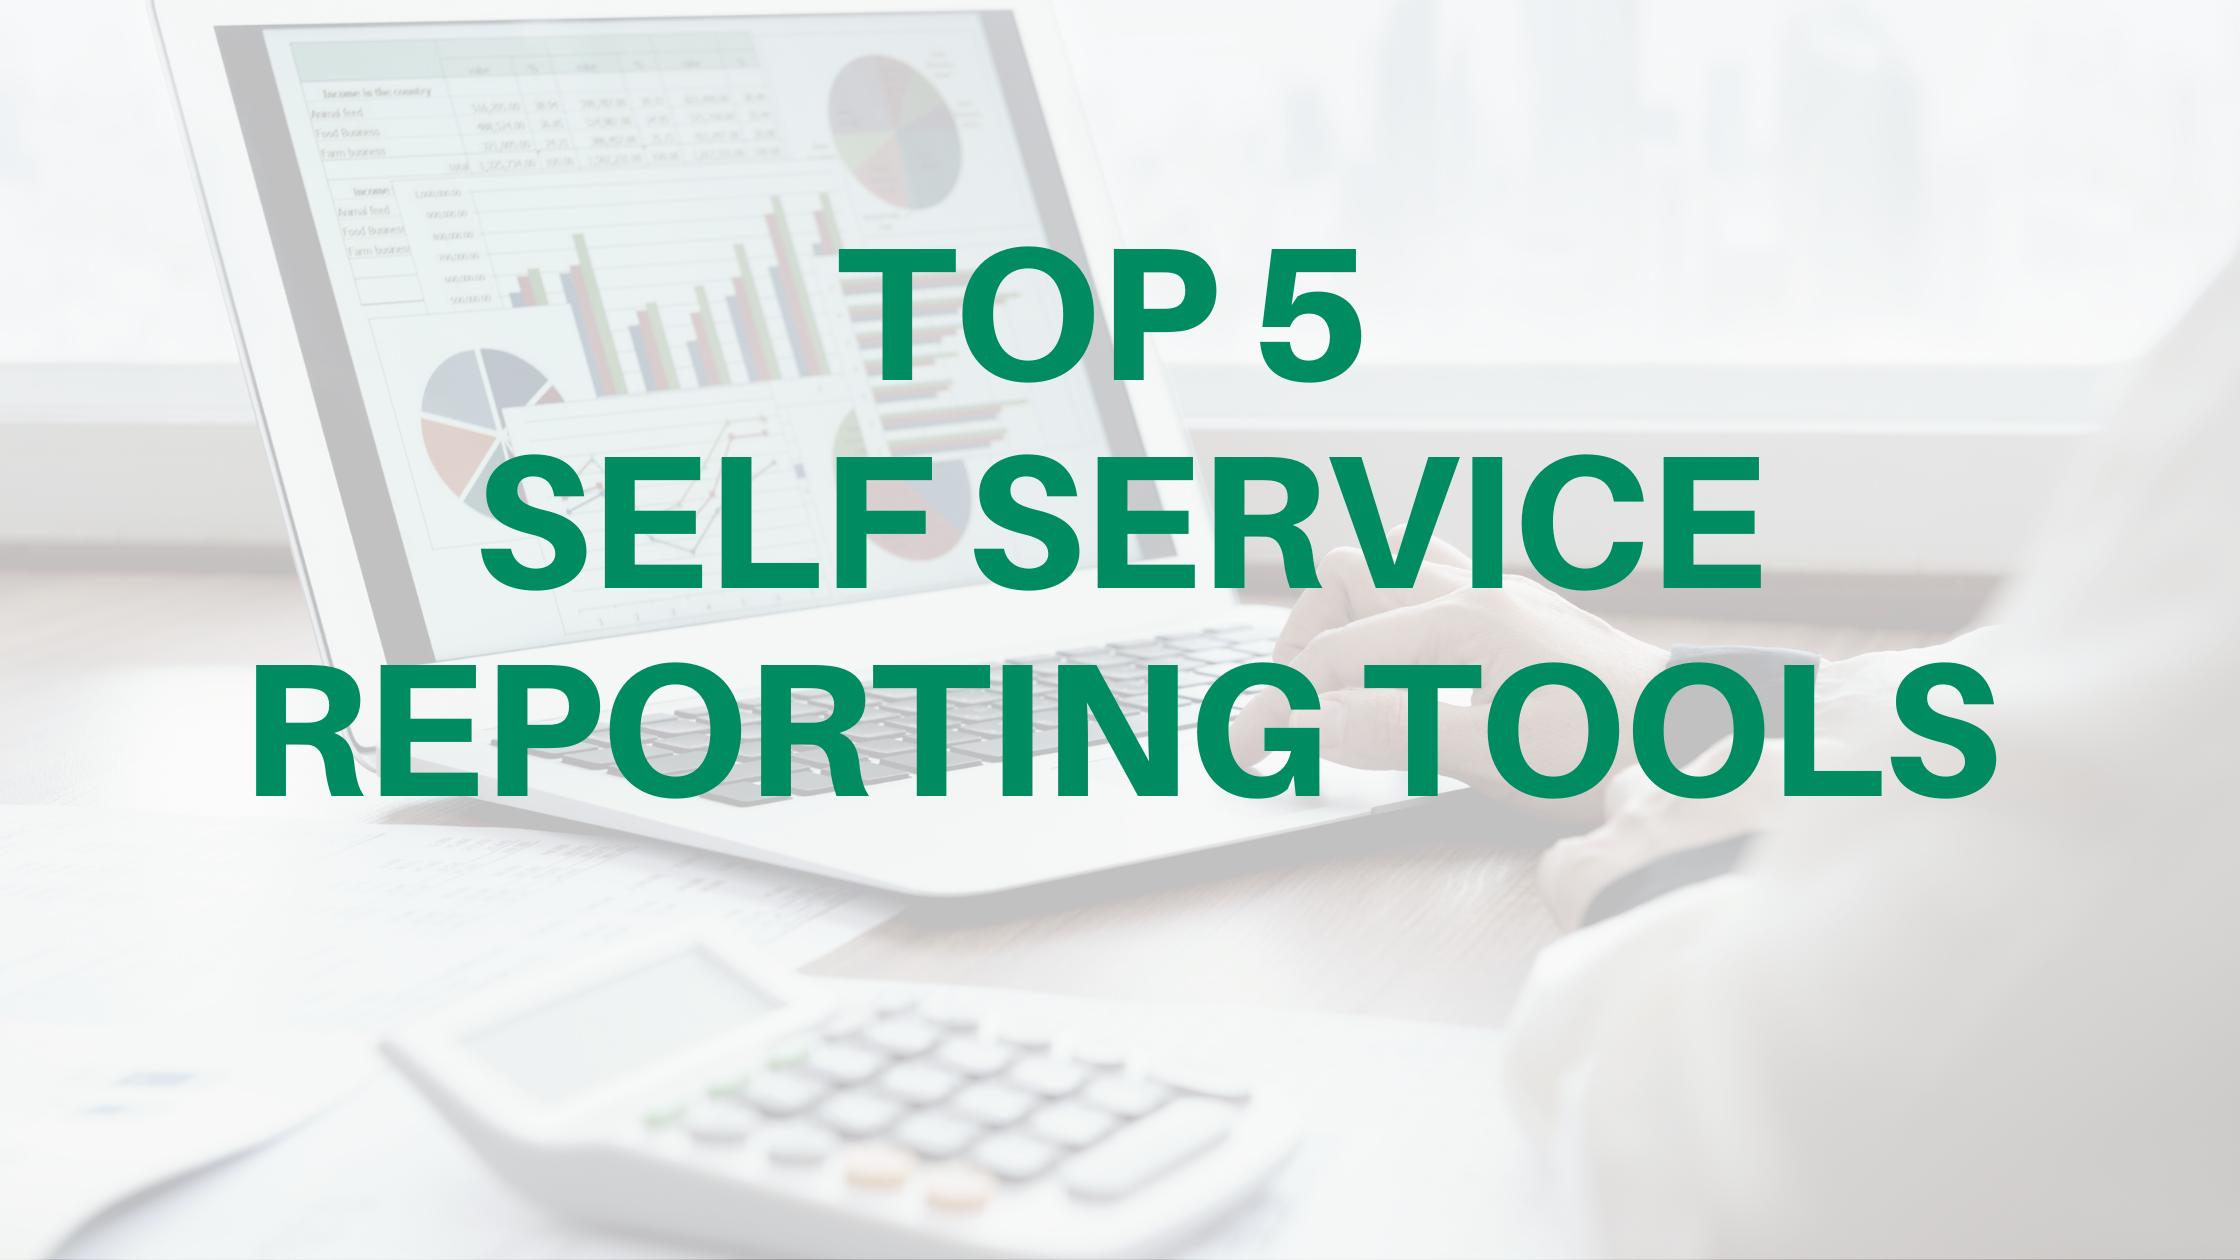 Top 05 Self-Service Reporting Tools: An In-depth Review